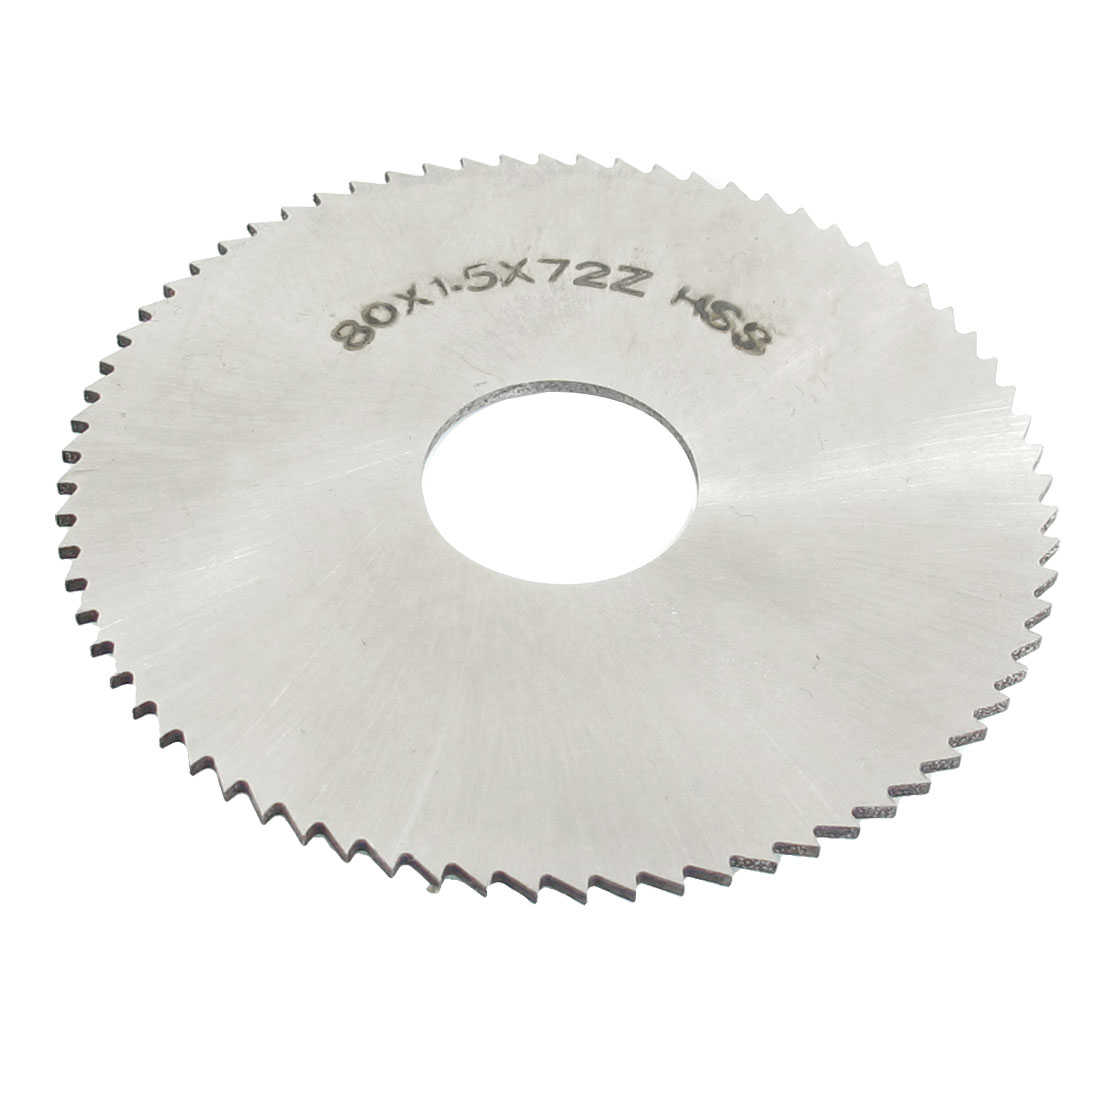 Unique Bargains 80mmx22mmx1.5mm 72 Teeth 72T HSS Incision Milling Slotting Saws Cutter